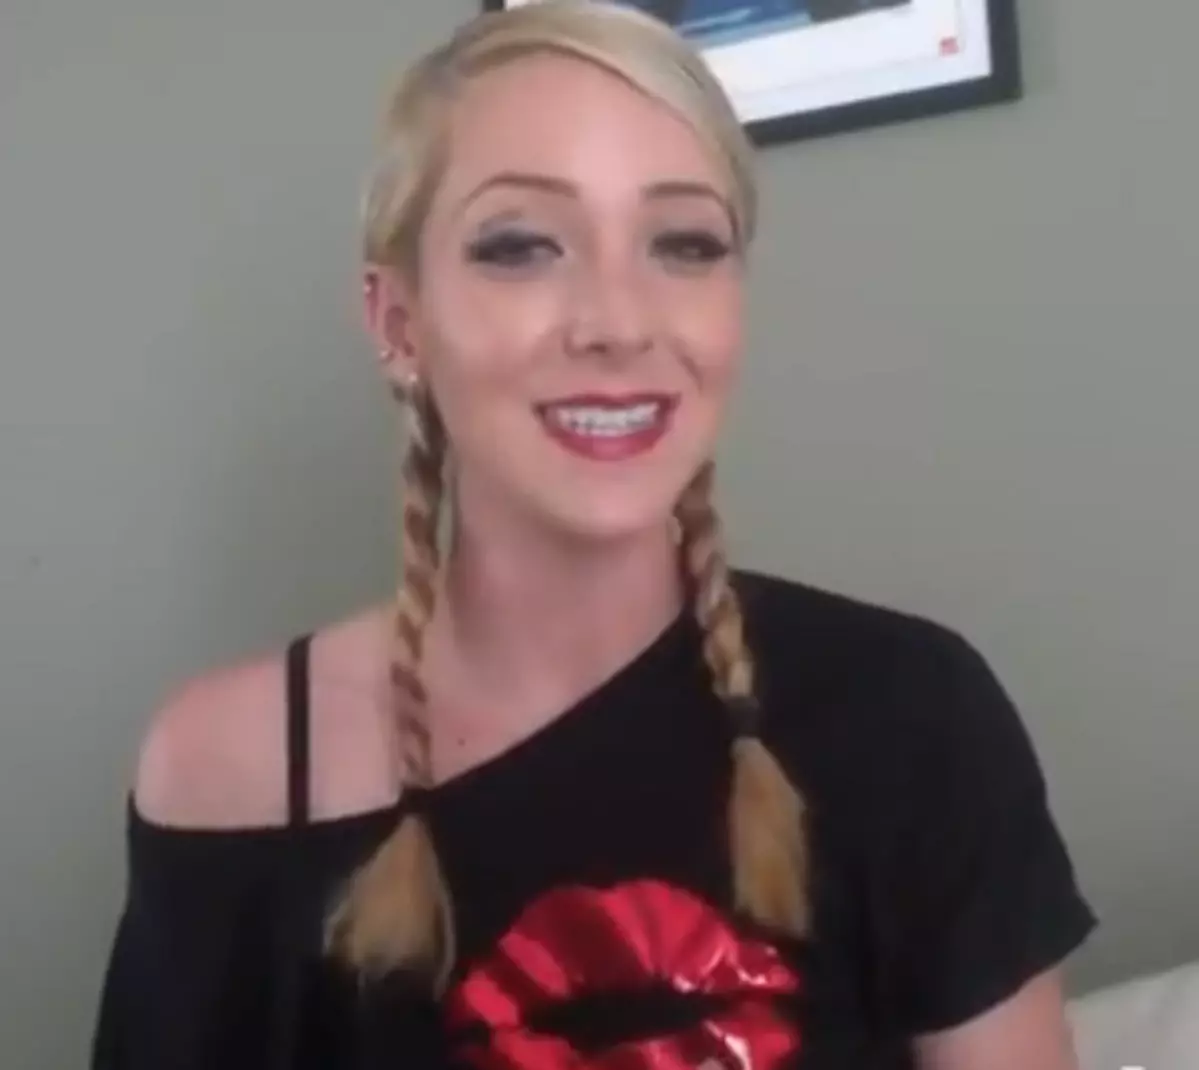 Jenna Marbles on How to Make Games More Exciting NSFW VIDEO.